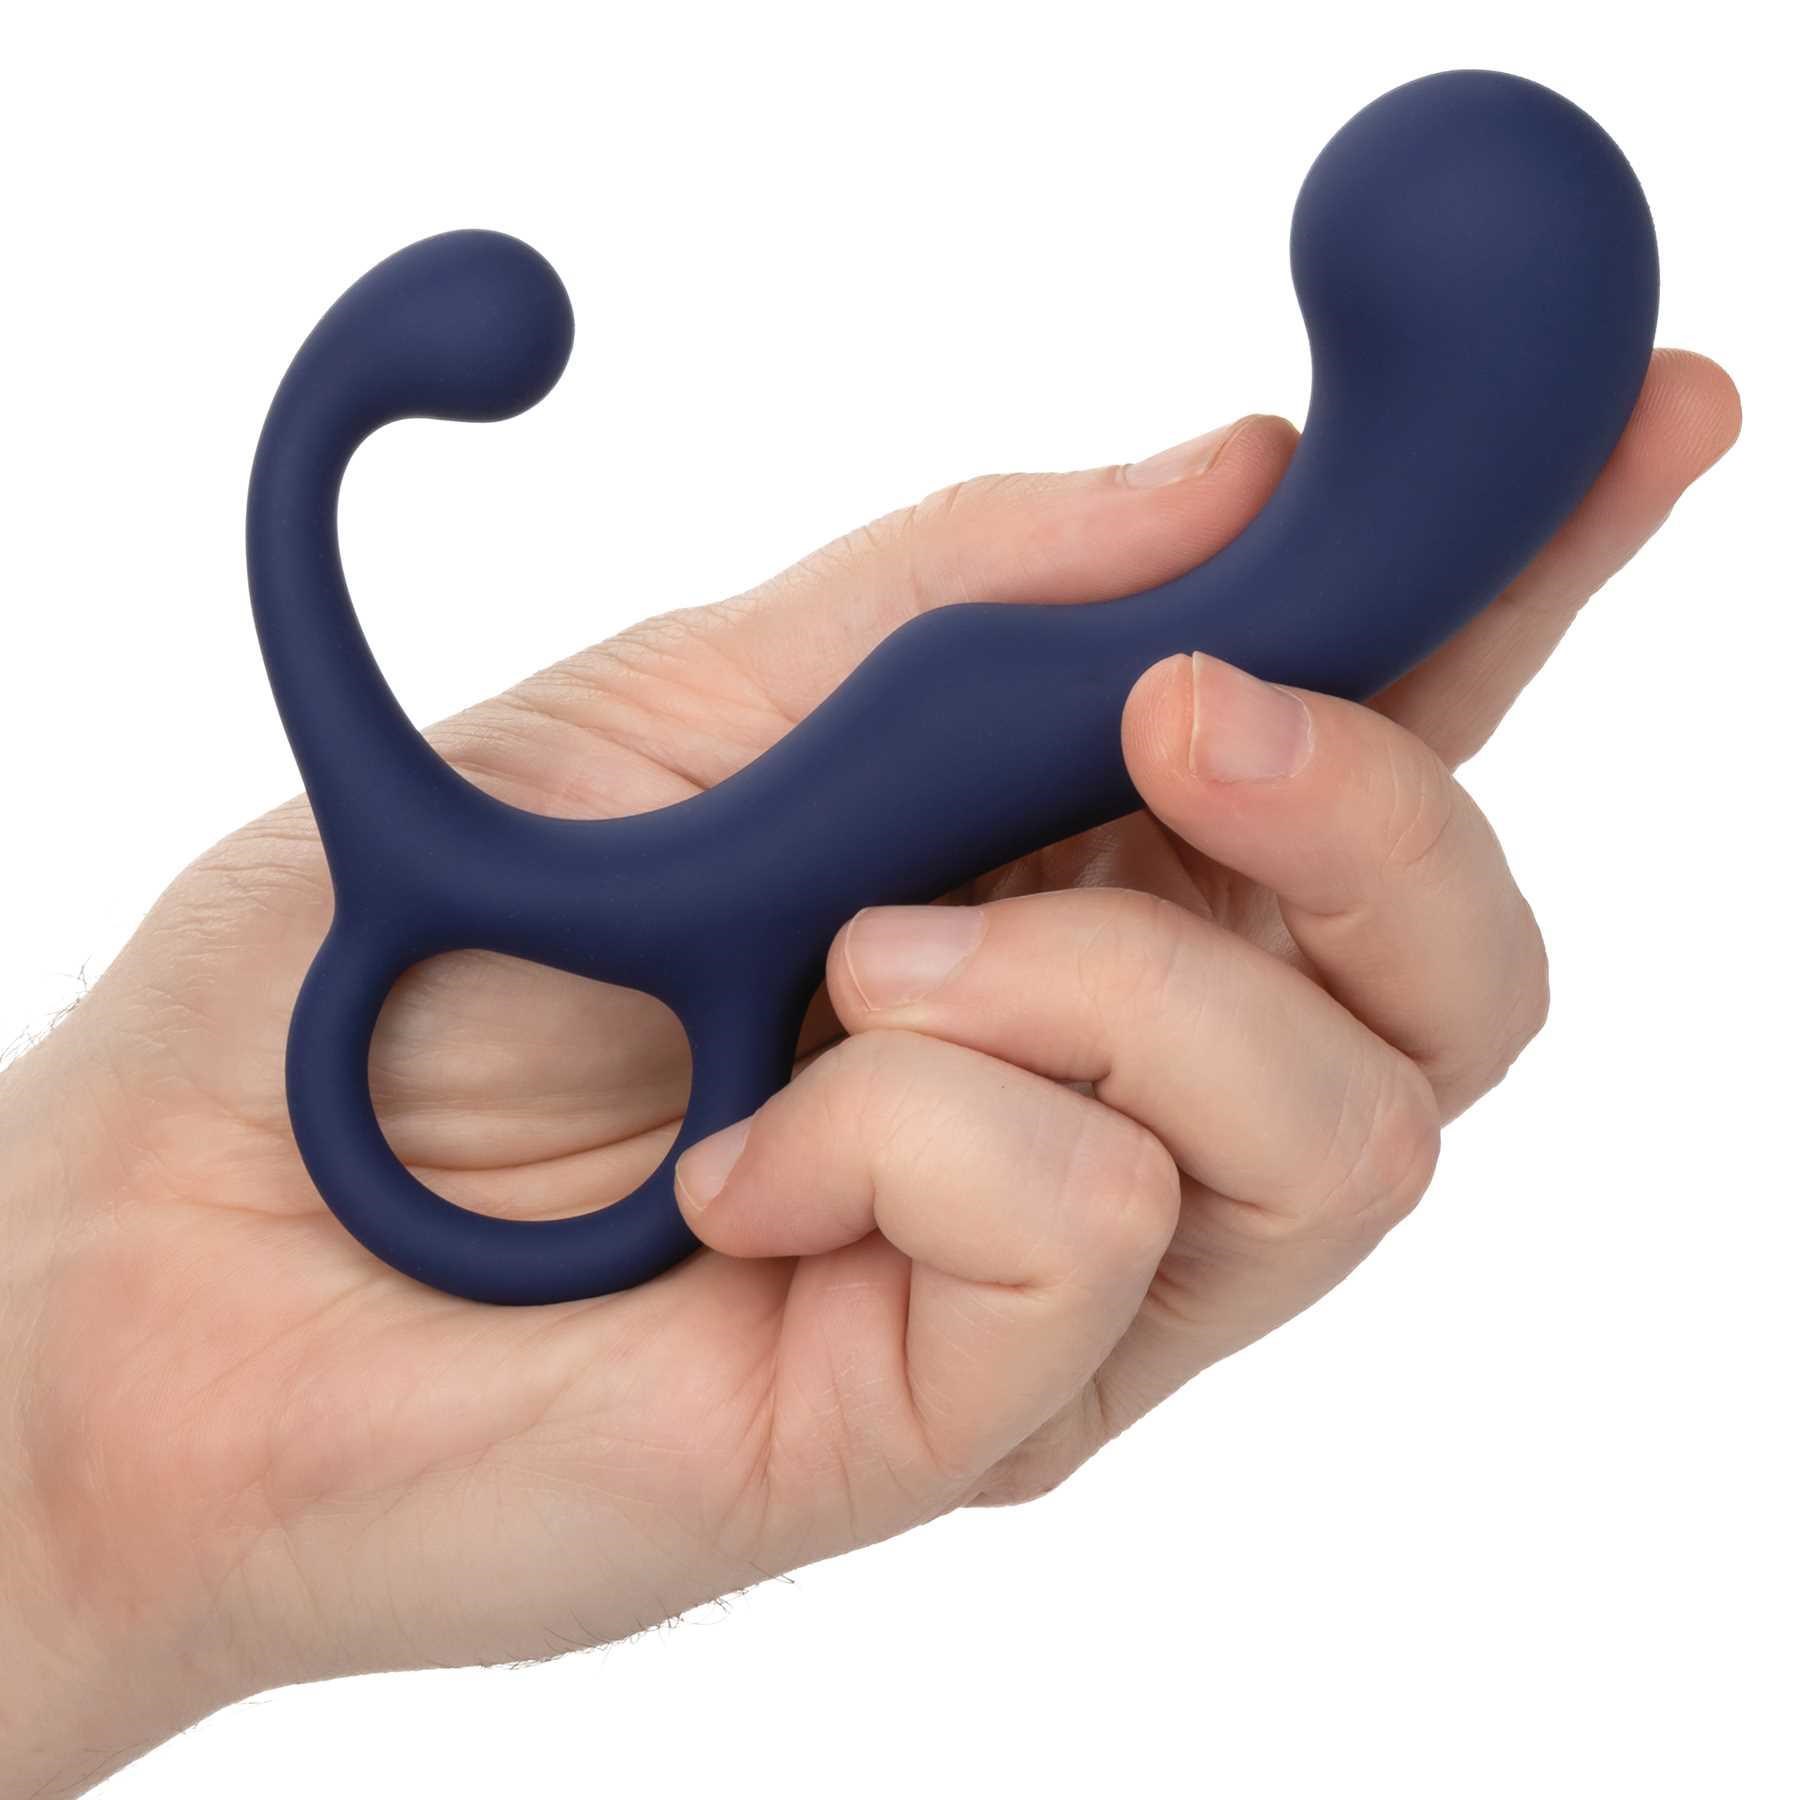 Viceroy Agility Prostate Probe hand held